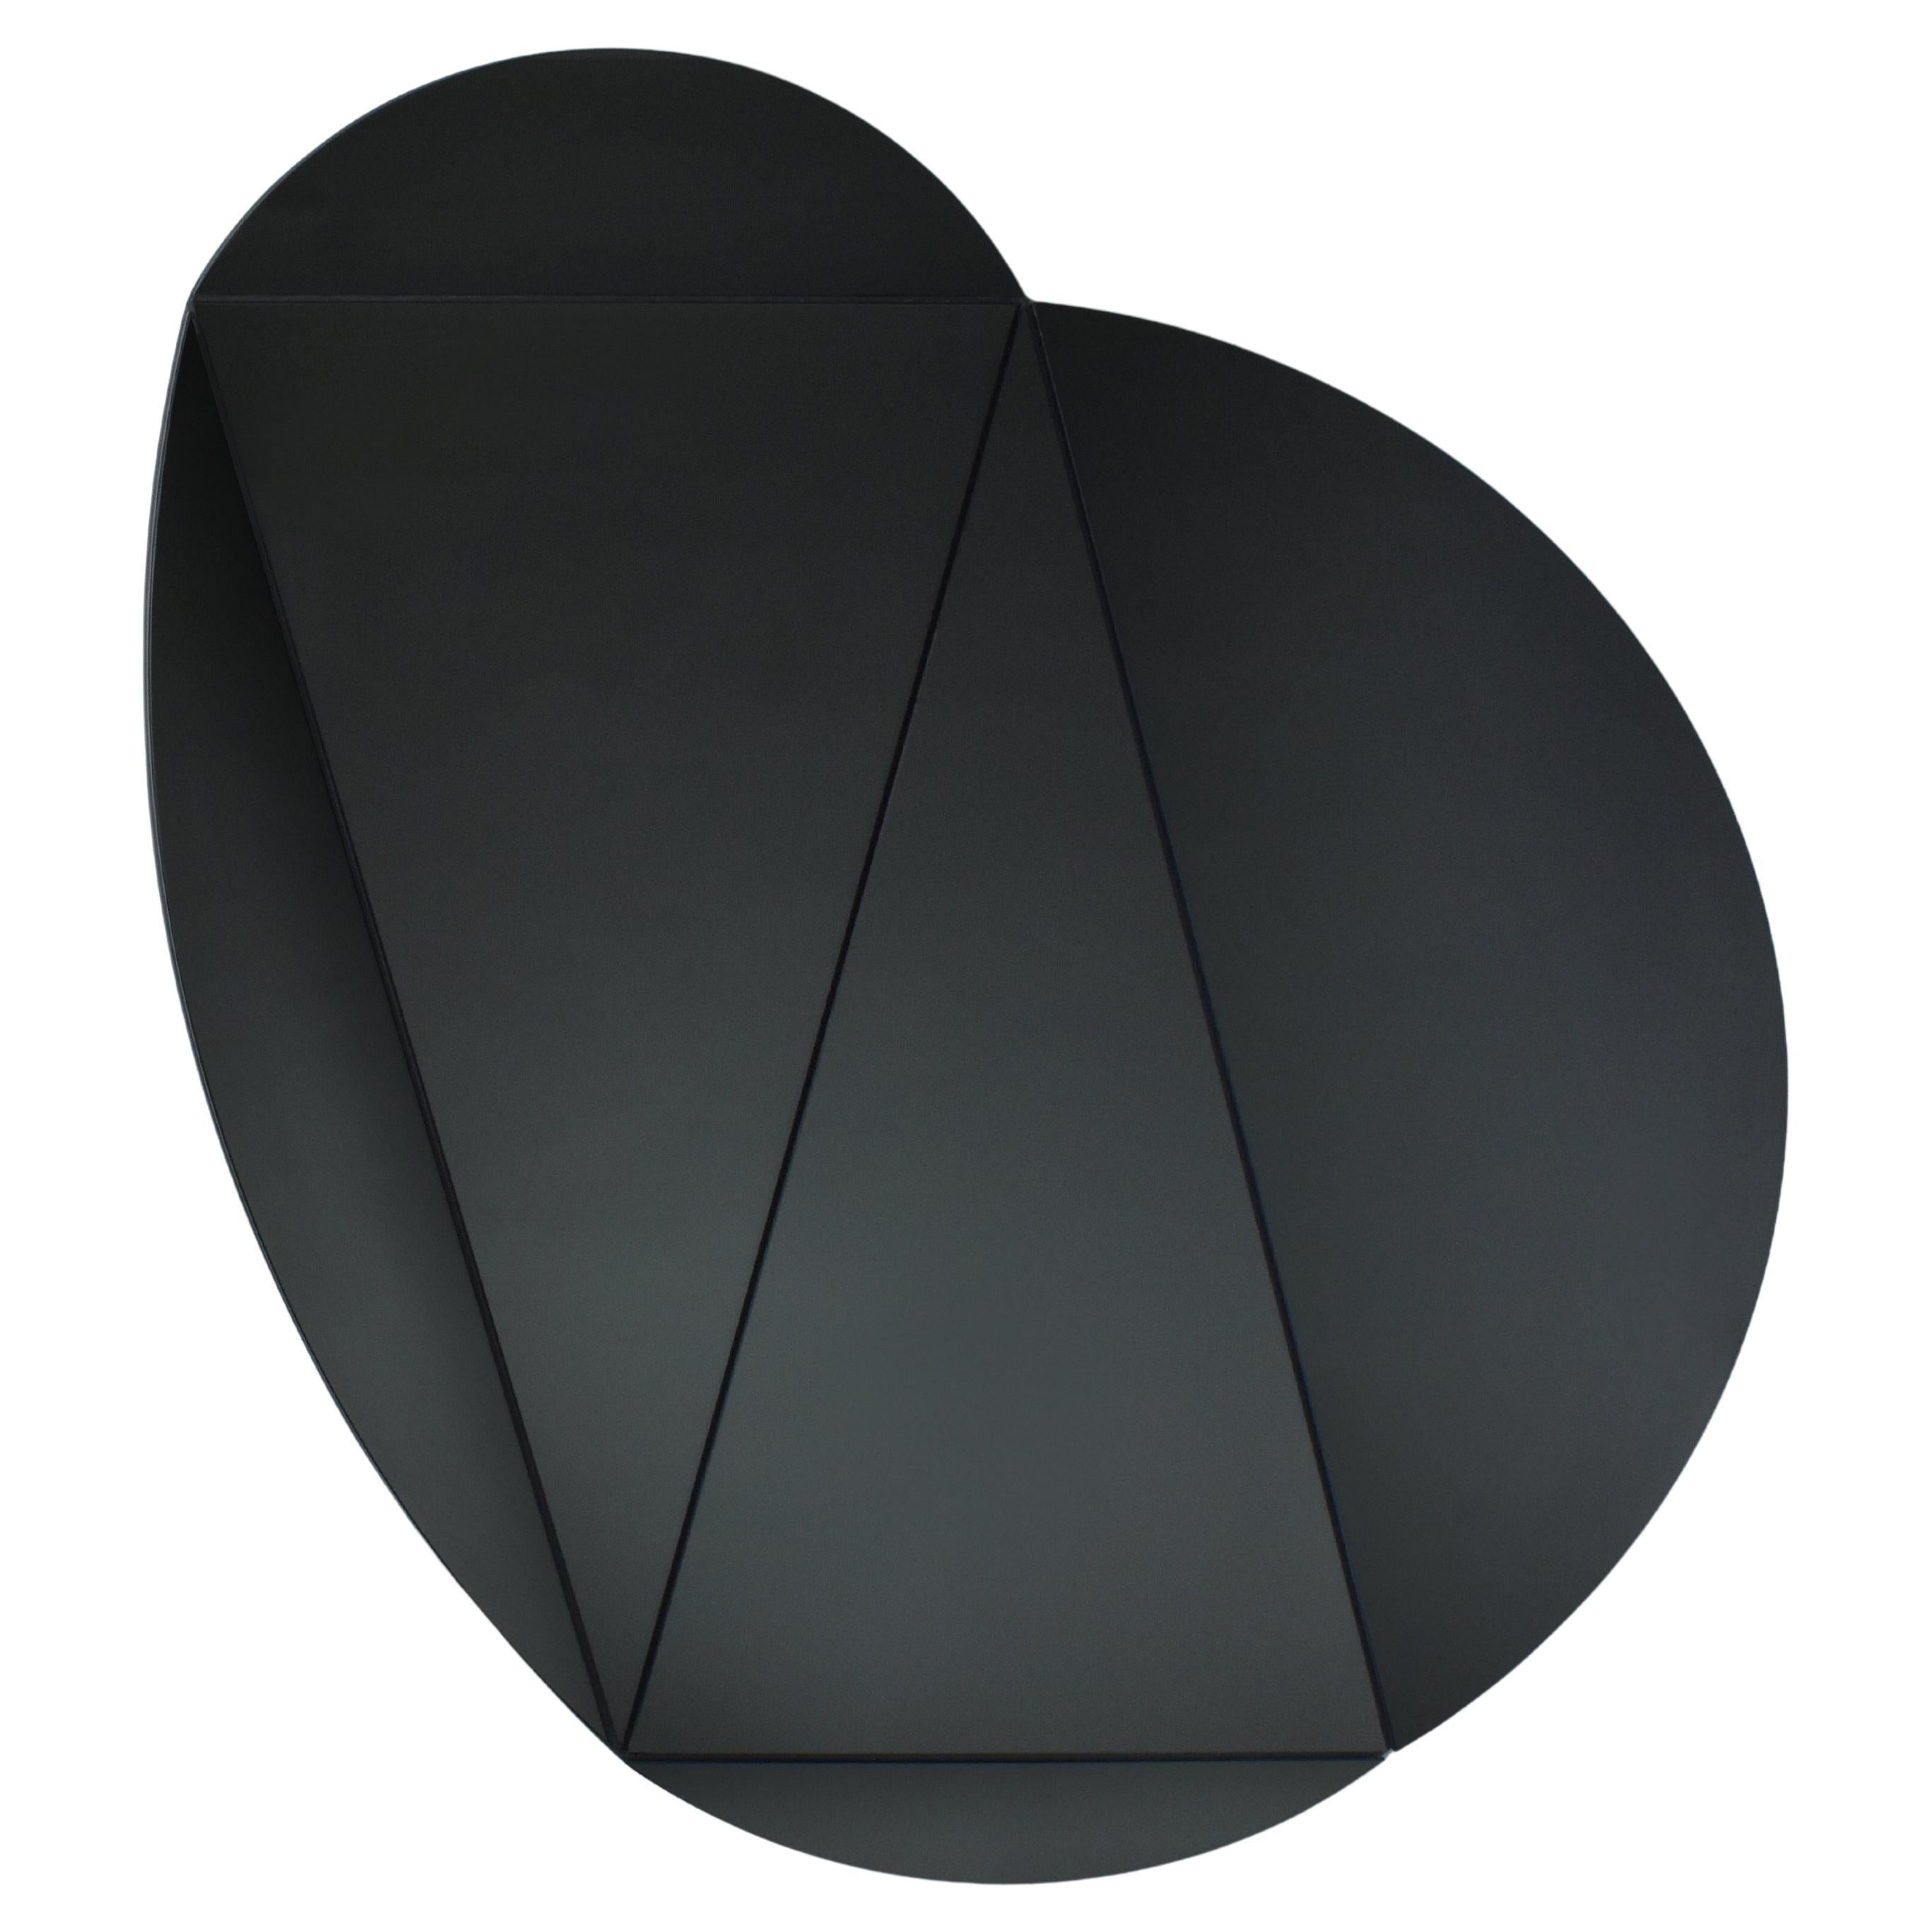 Segment Mirror, Modular Wall Mirror in Black, Custom Colors and Configurations For Sale